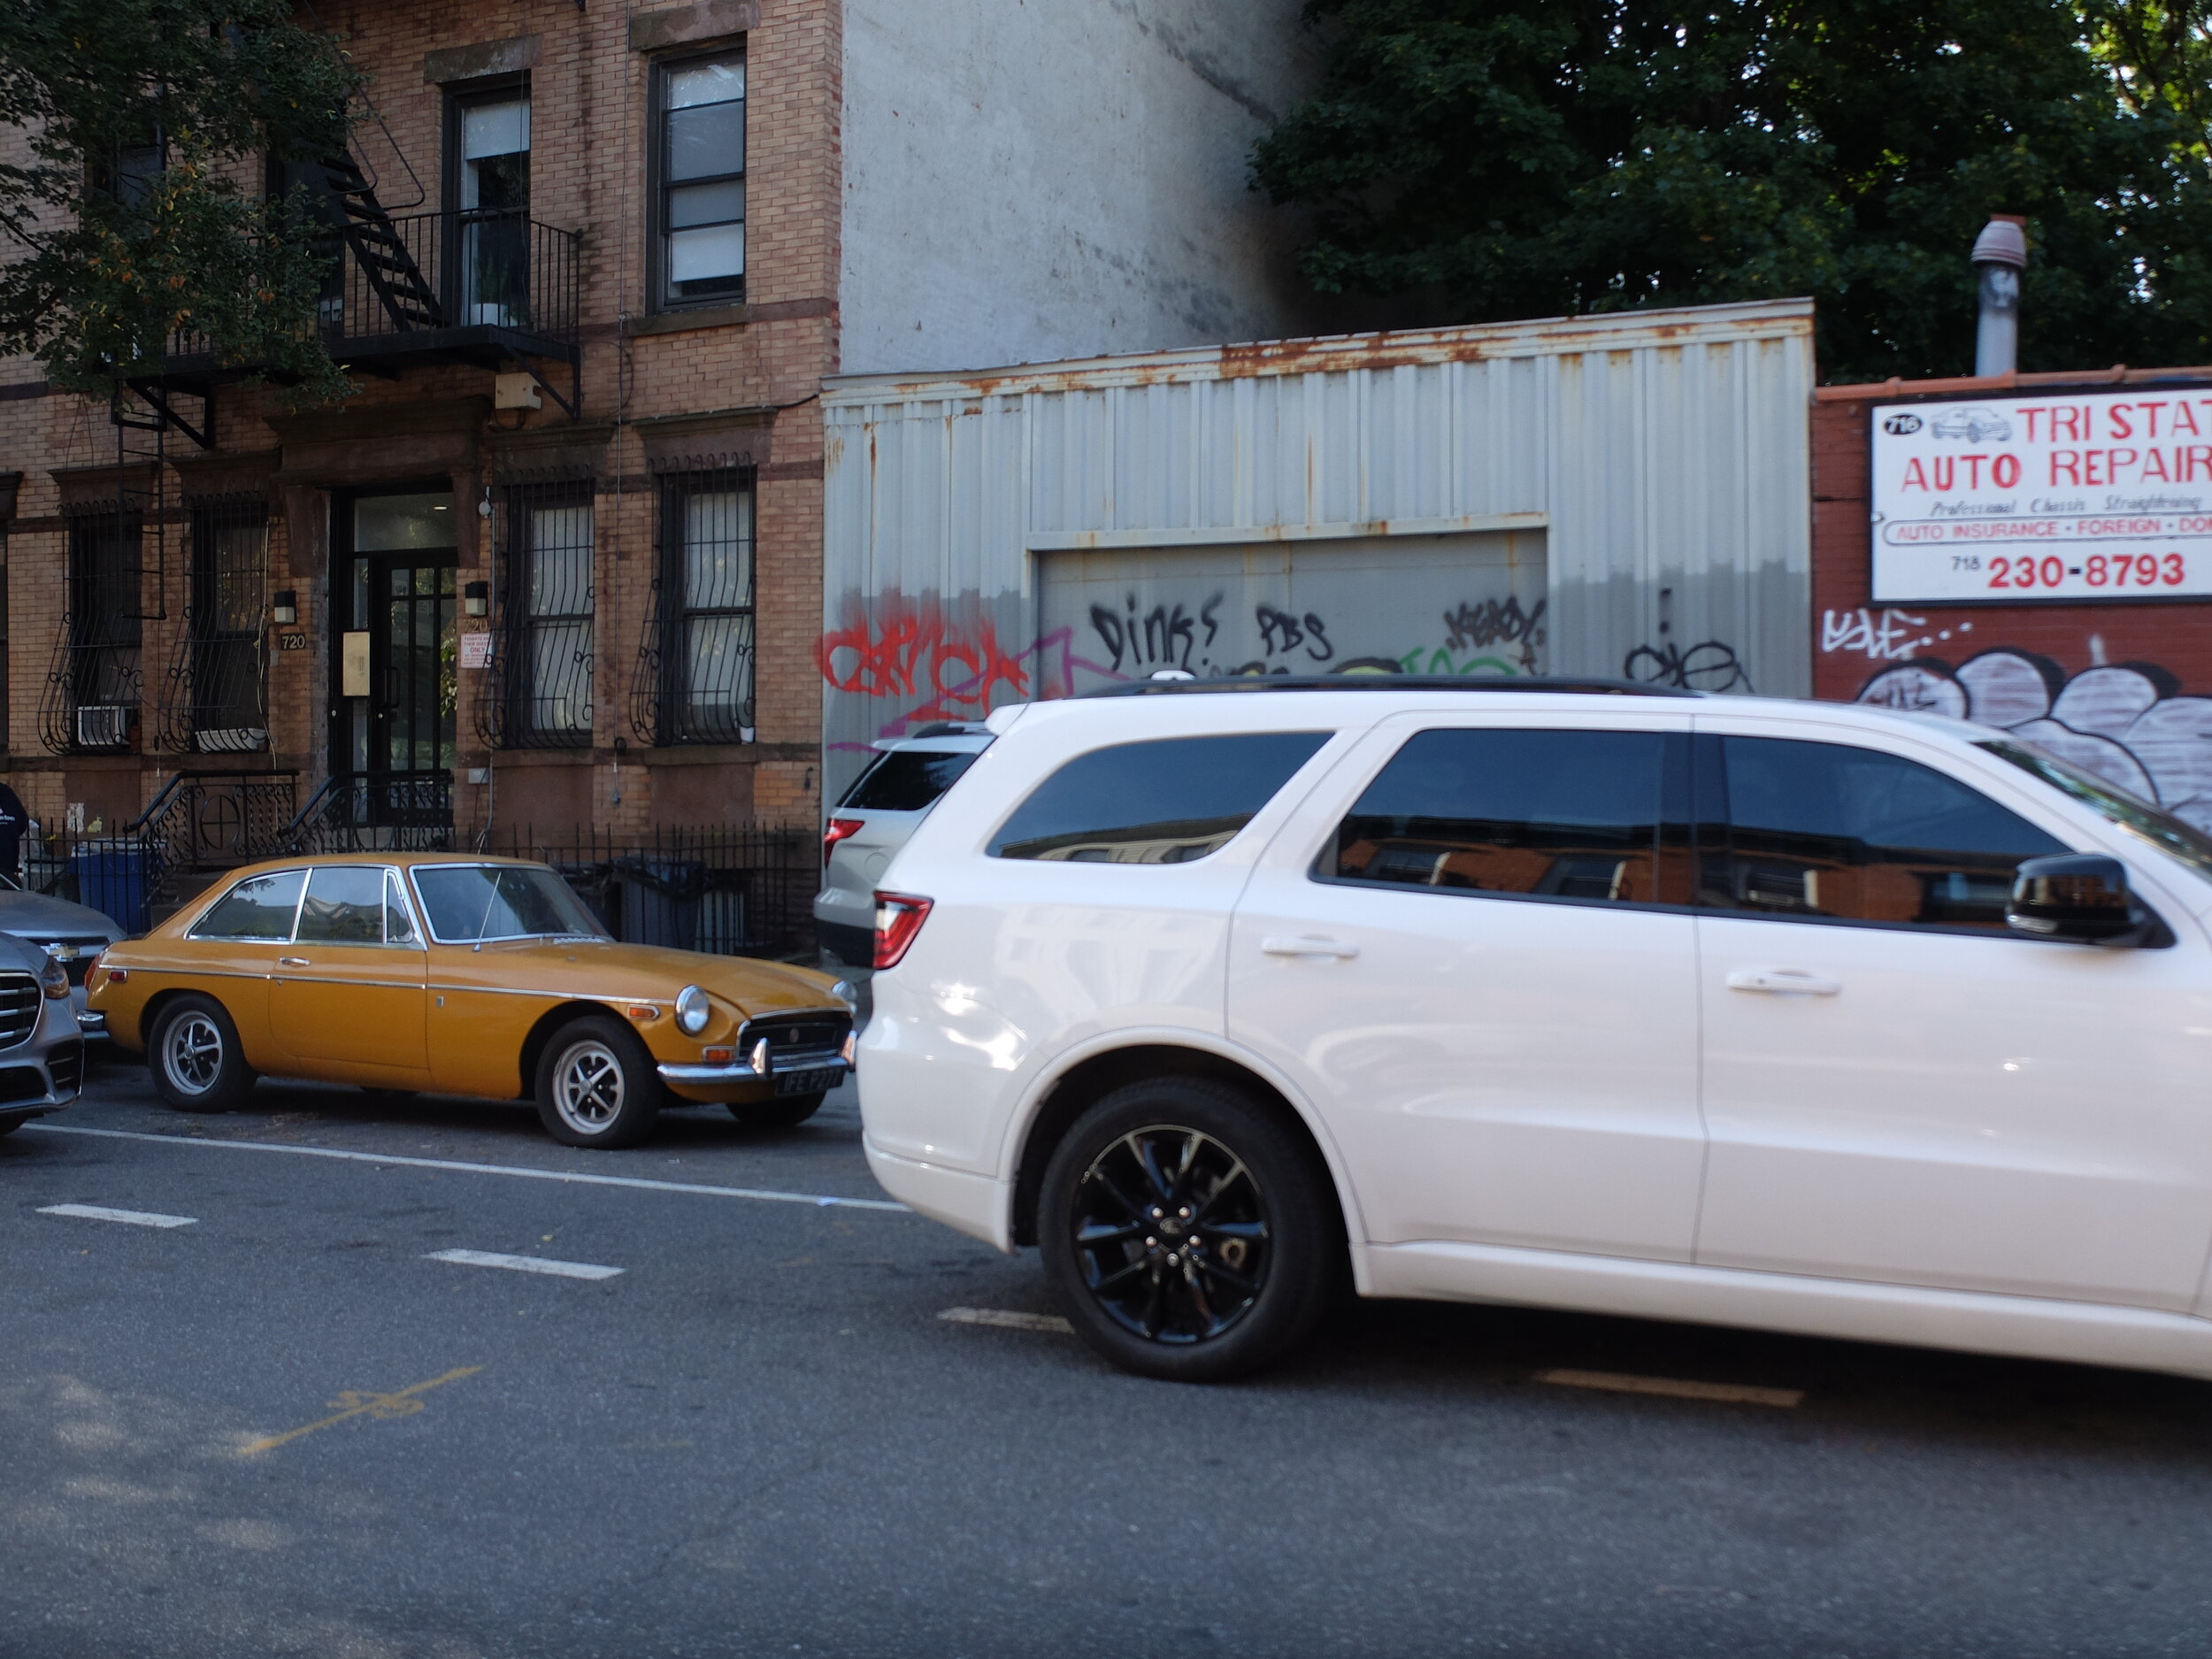 A rare sighting in NYC, a MGB GT.  Only the 2nd MG I've seen in the last nine-ten years of visits here.